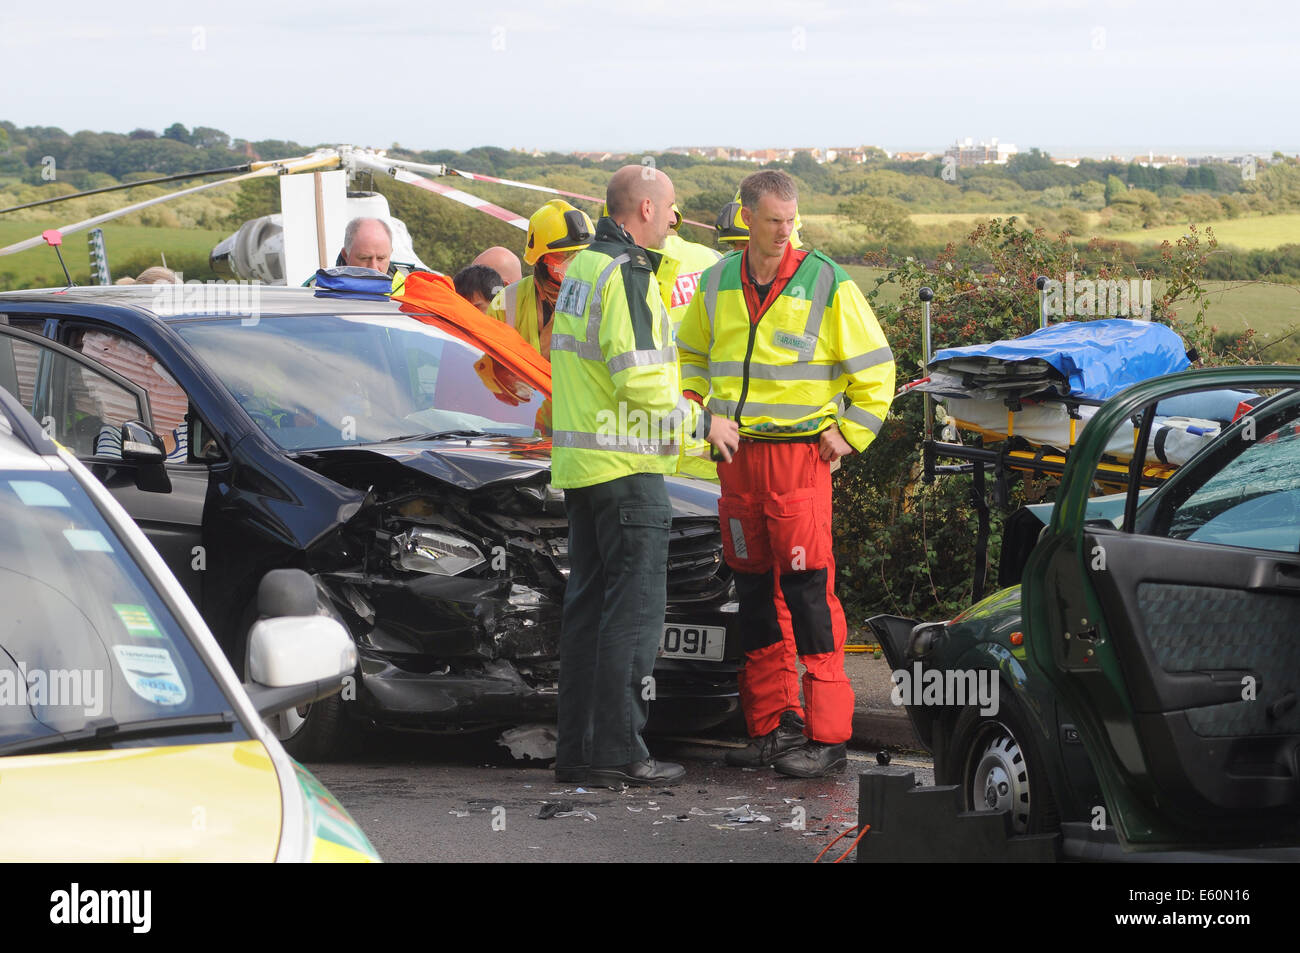 Bexhill, East Sussex, UK.10th August 2014. Emergency Services in action after a Road Traffic accident on the A259 , Barnhorn Road, West of Little Common. A lady was taken from the scene by road ambulance Police advised her injuries were not serious, helicopter evacuation was not required by Kent HEMS which was quickly on site. Locals at the scene advise that this is a regular accident Black spot.. David Burr/Alamy Live News Stock Photo